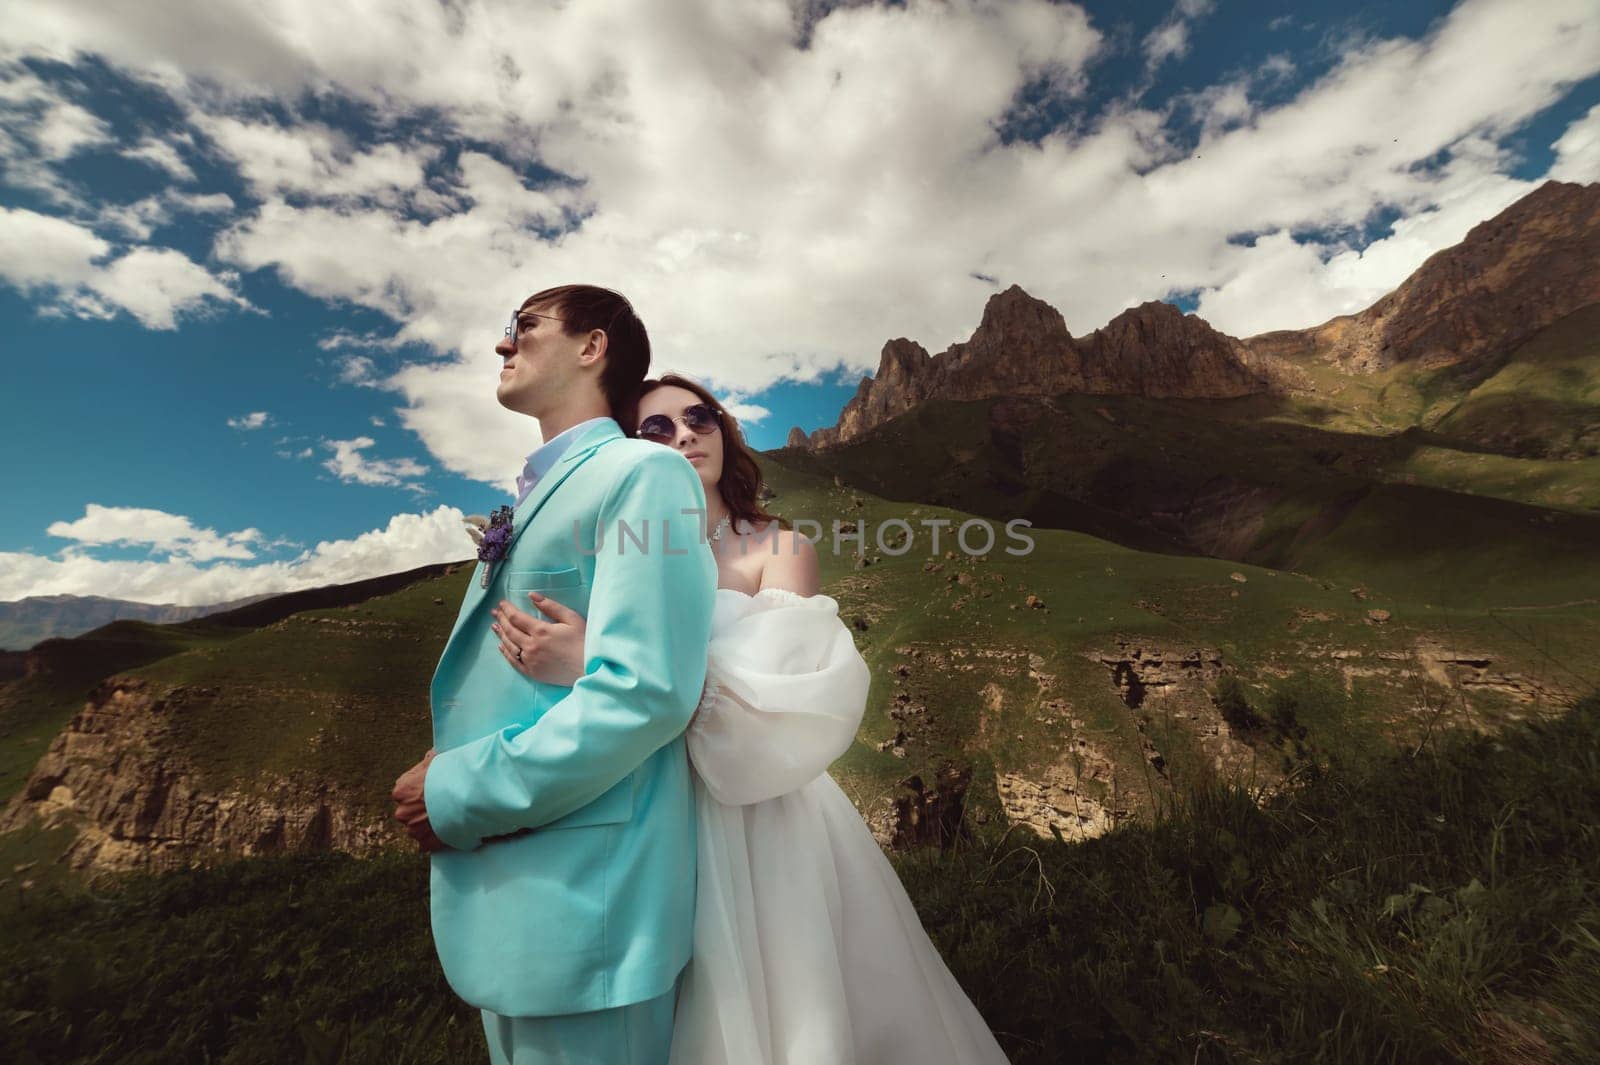 wedding couple walks in the mountains. the bride hugs tenderly with her eyes closed the groom from the back against the backdrop of green rocky mountains and blue sky, close-up by yanik88